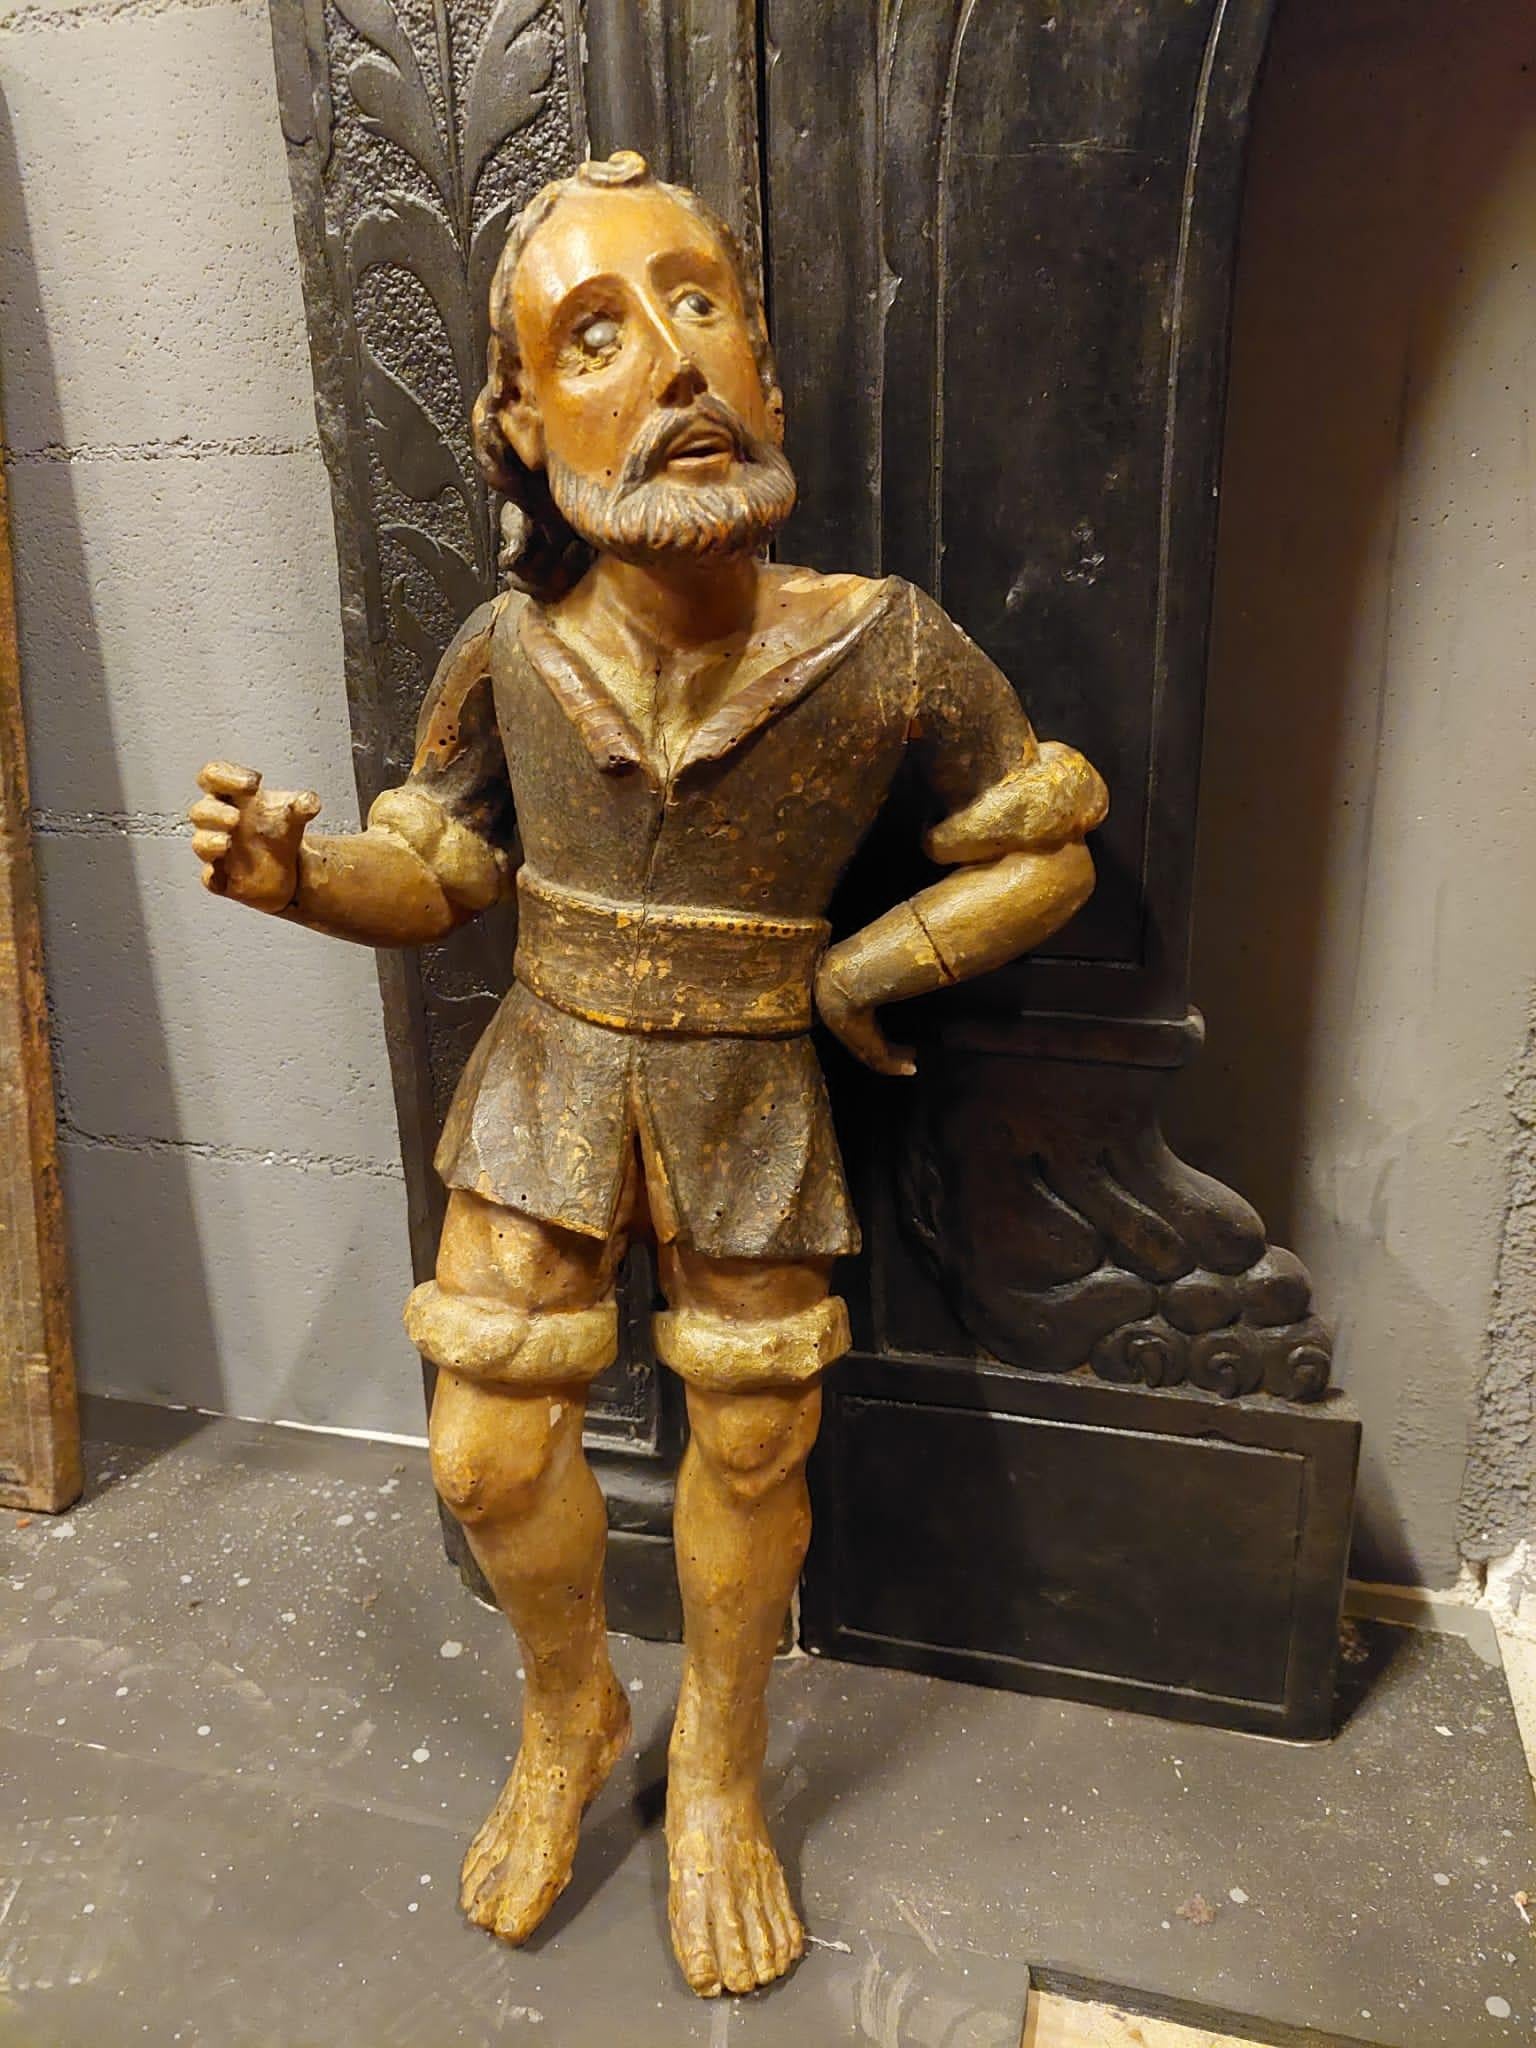 Ancient wooden statue, carved by hand and lacquered, from a very ancient period, sixteenth century, depicting a rural historical character, built by composing statues in a typically Spanish style of the time.
Clothes and hair as a worker, of great